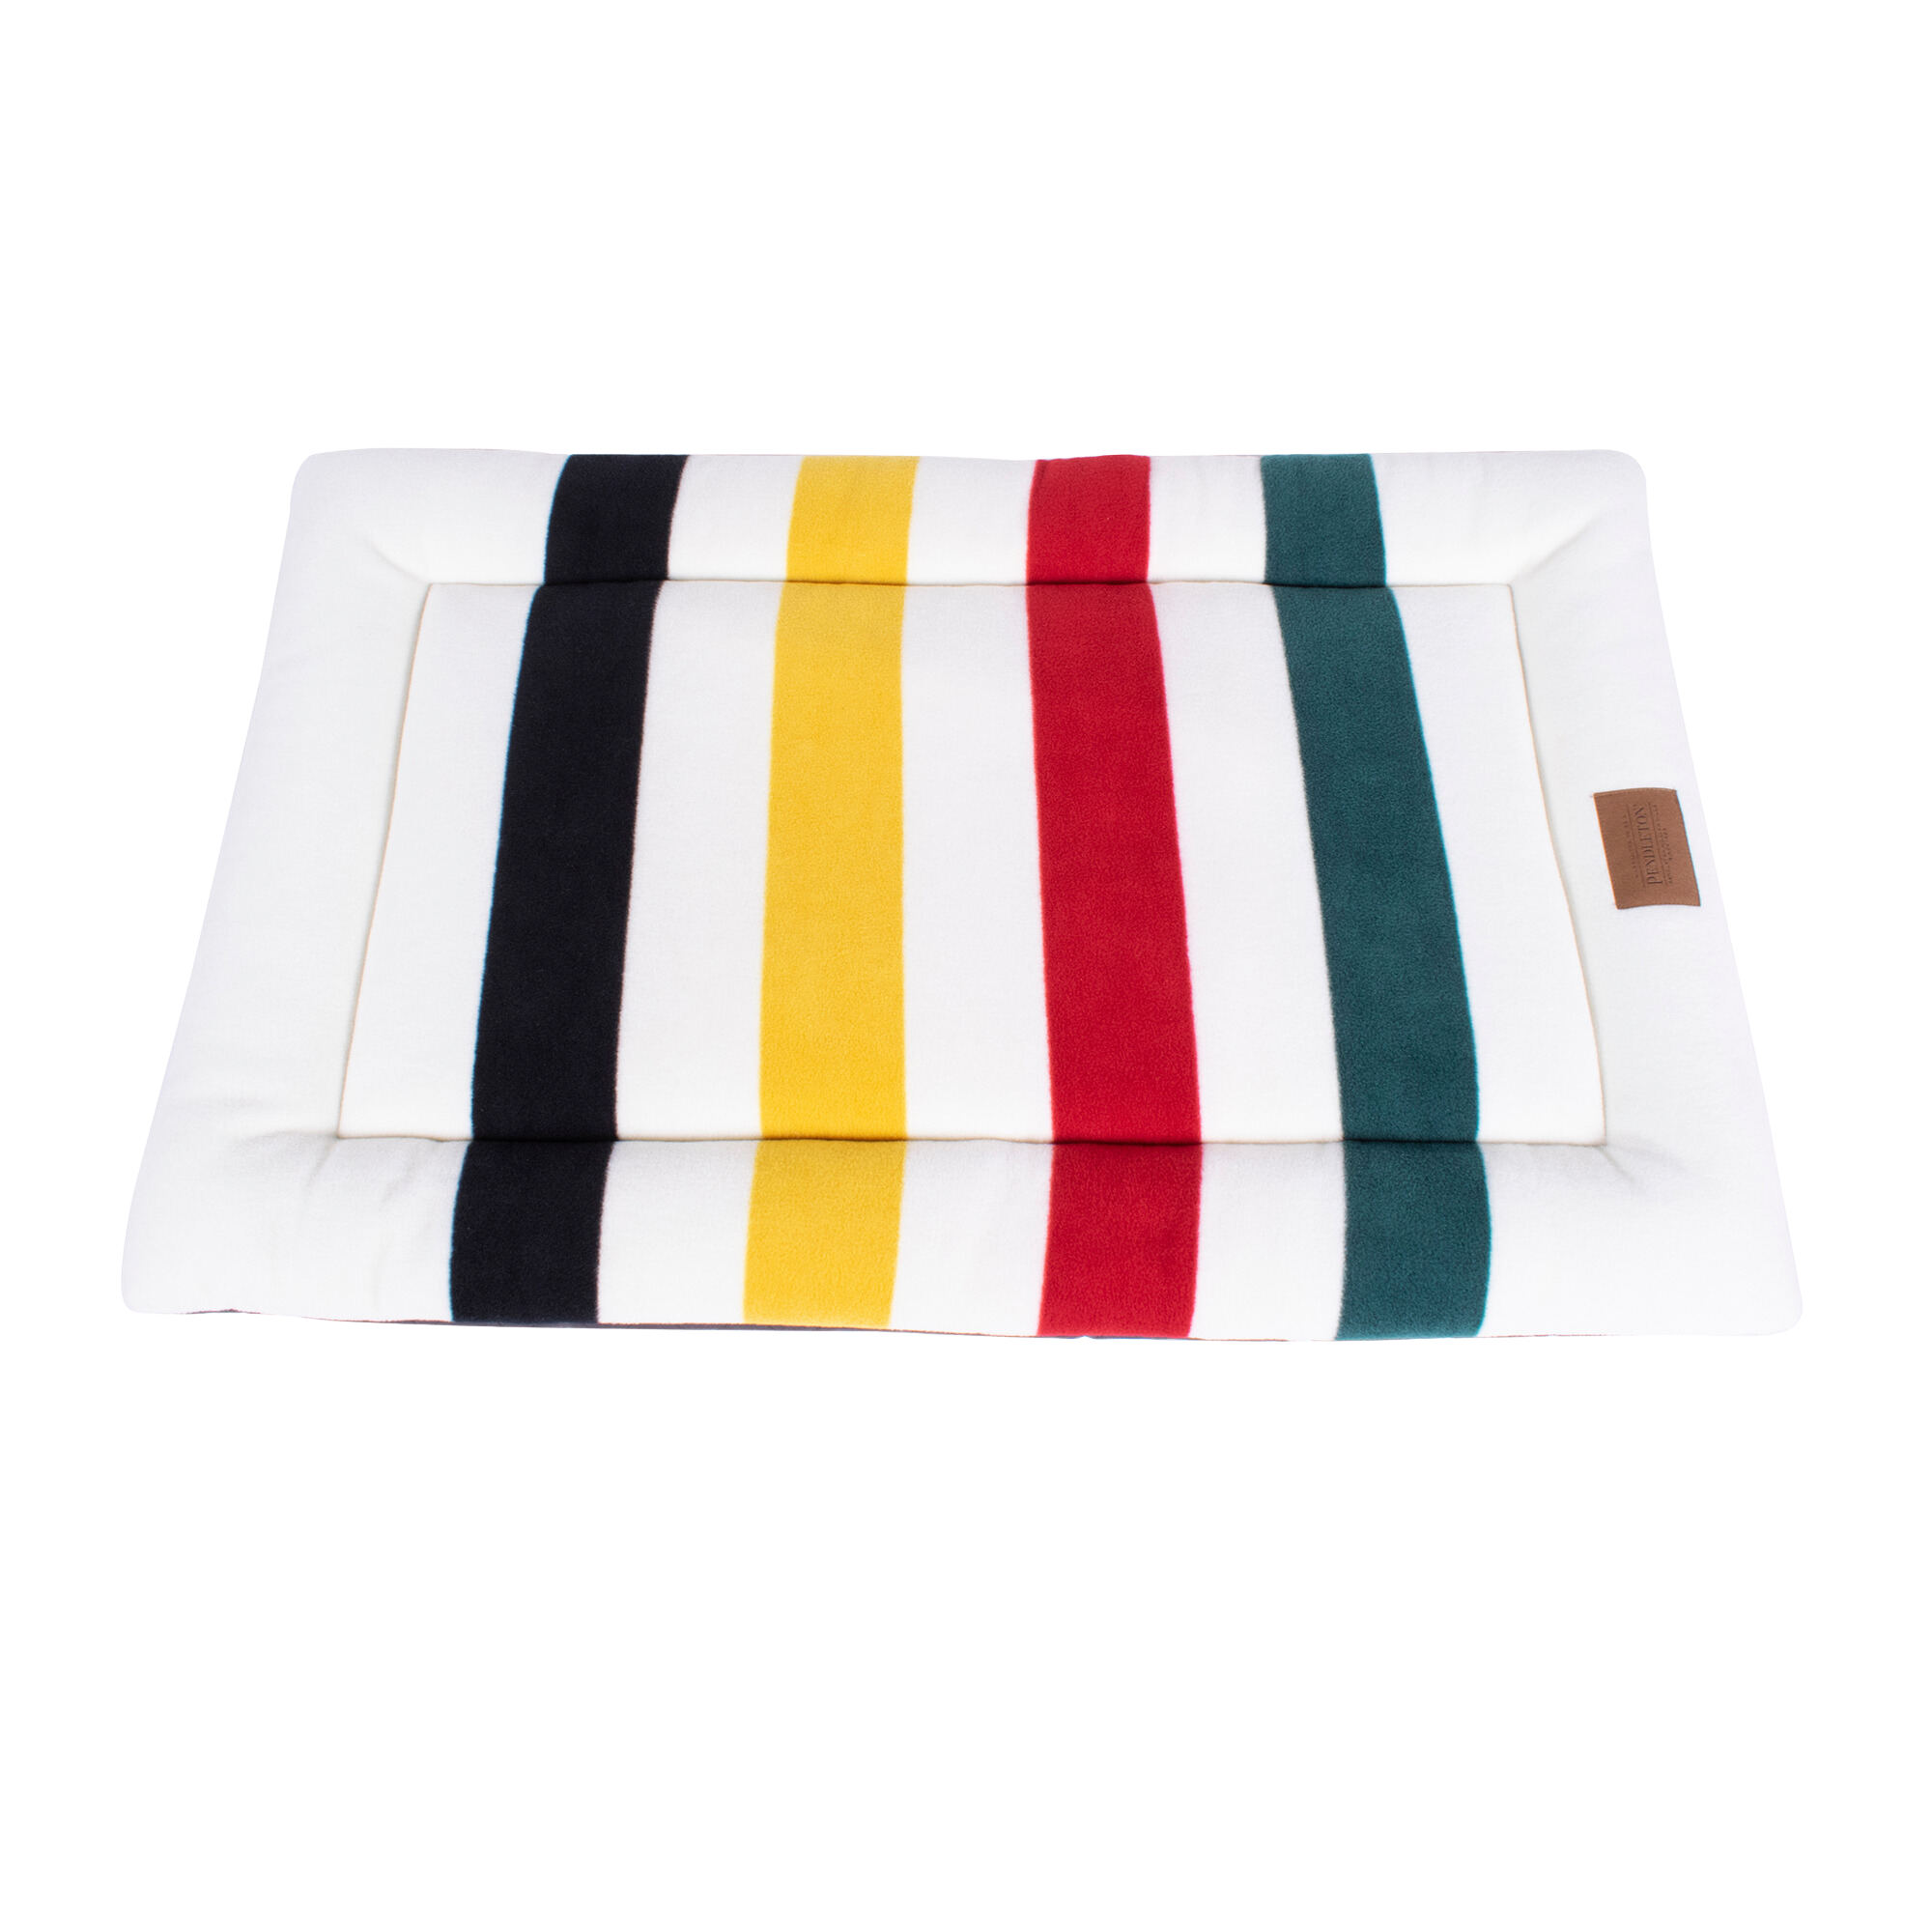 PENDLETON-DOG-COMFORT-CUSHION-DOG-KENNEL-MAT-CRATE-WHITE-RED-GREEN-YELLOW-GLACIER-NATIONAL-PARK